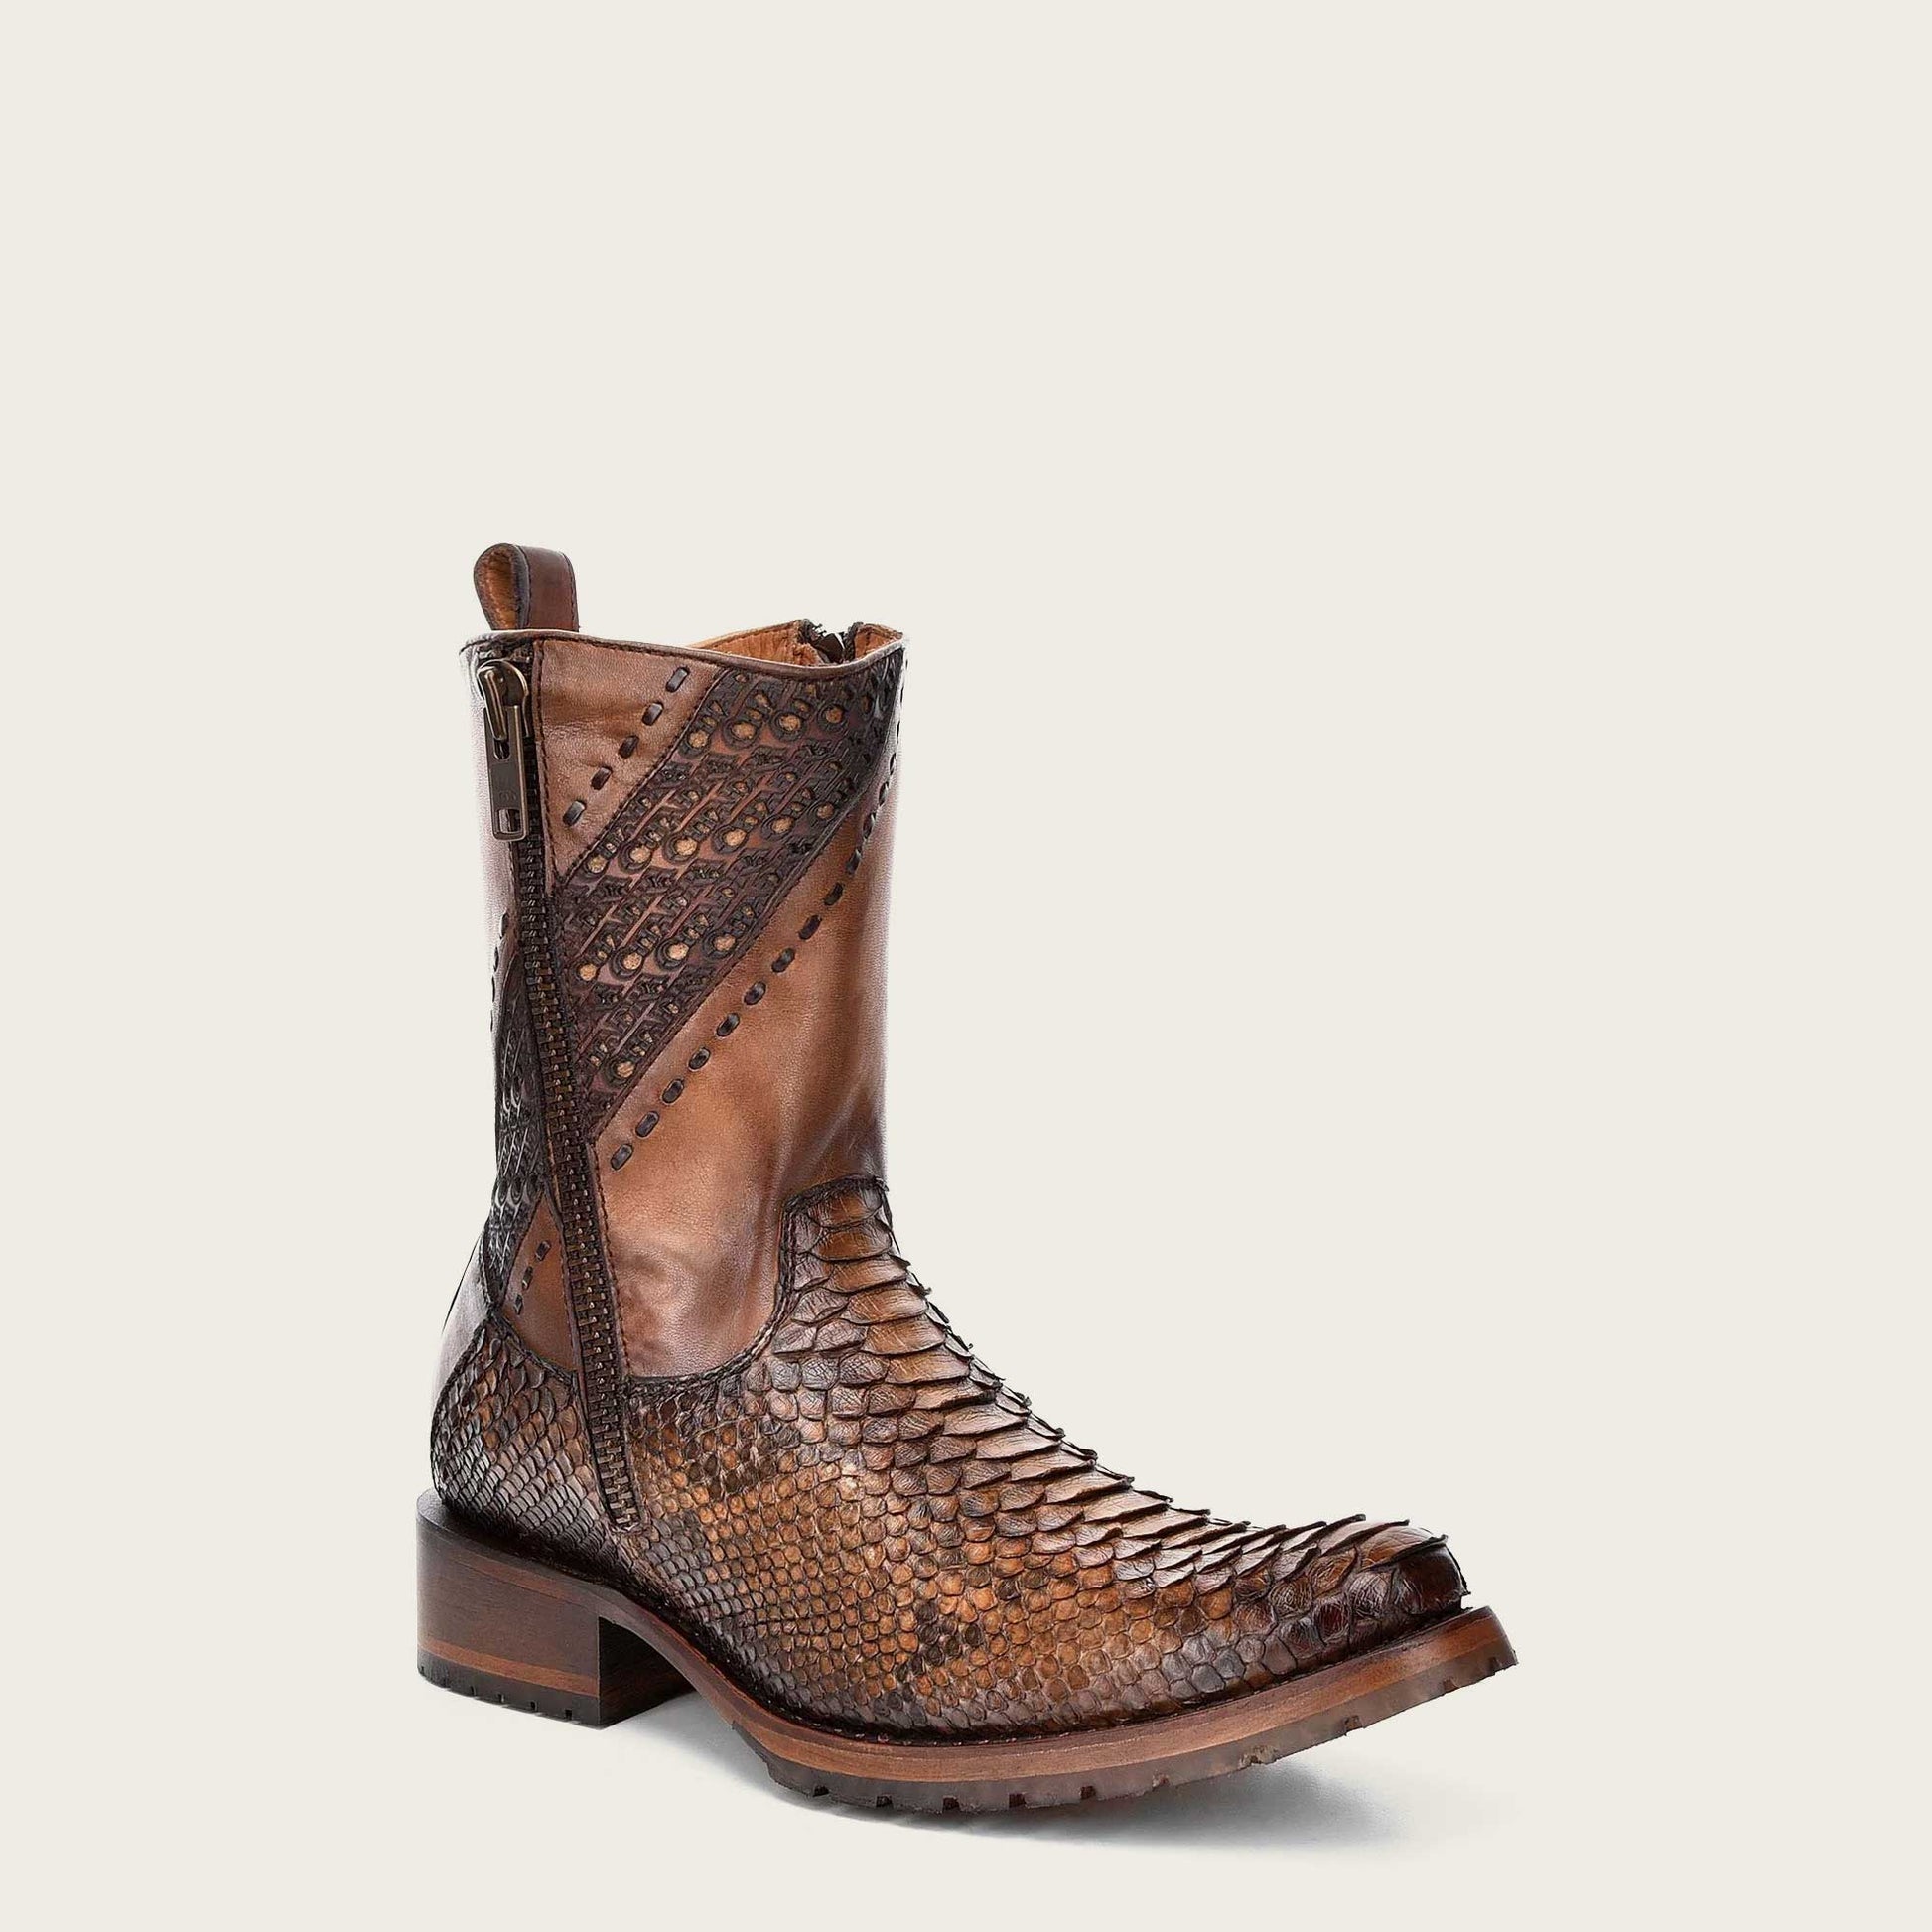 Can I use these products to clean these Ariat boots? : r/cowboyboots